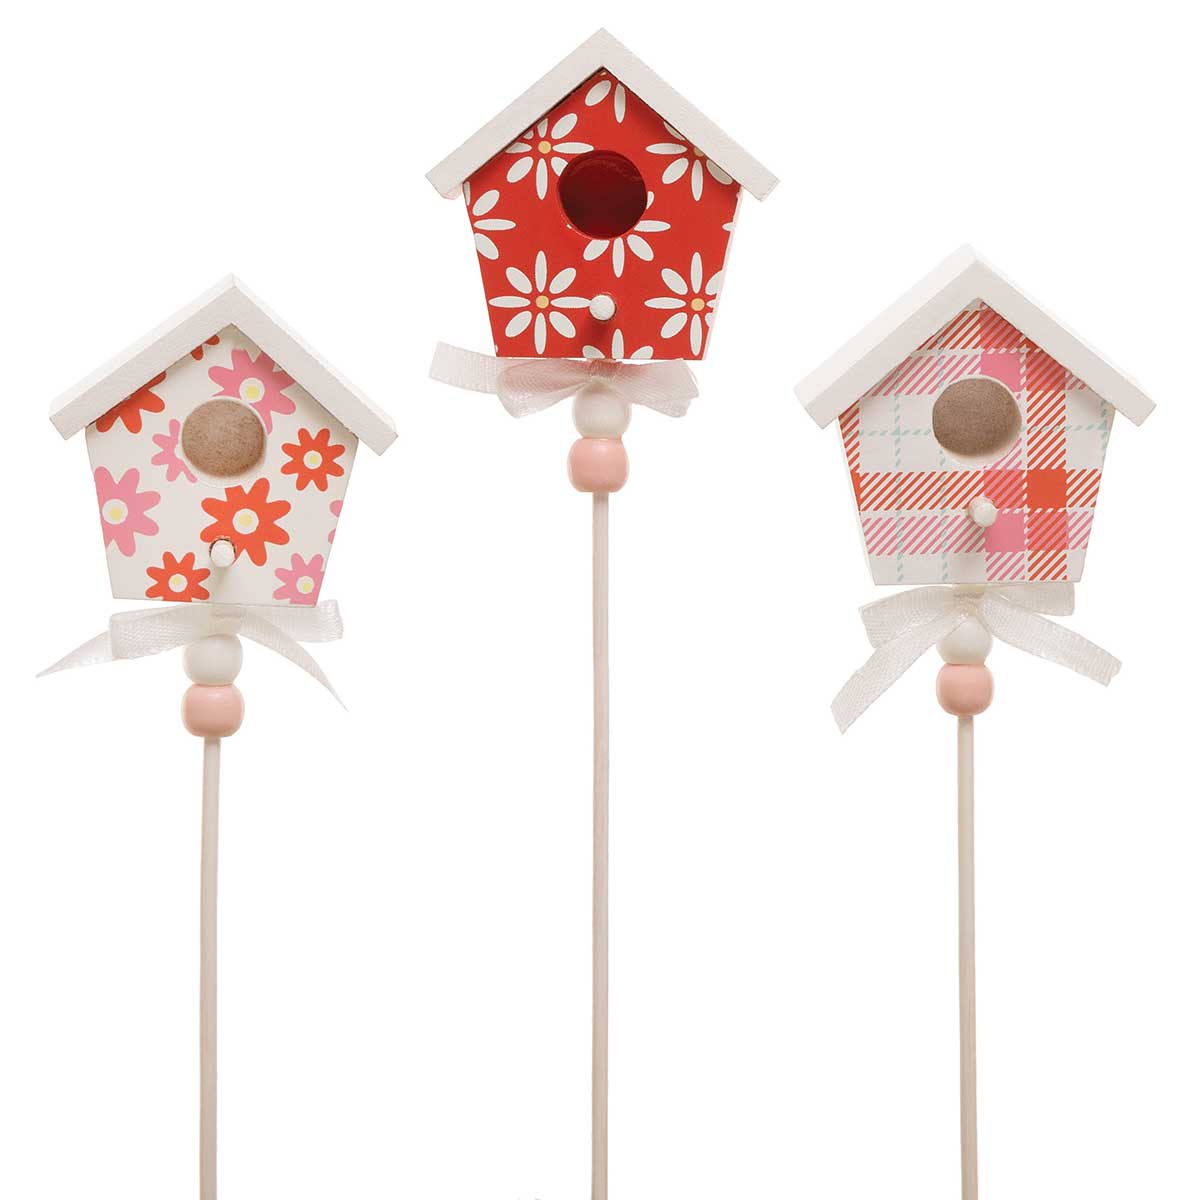 BIRDHOUSE ON STICK 3 ASSORTED 2.25IN X 1IN X 2.25IN WOOD